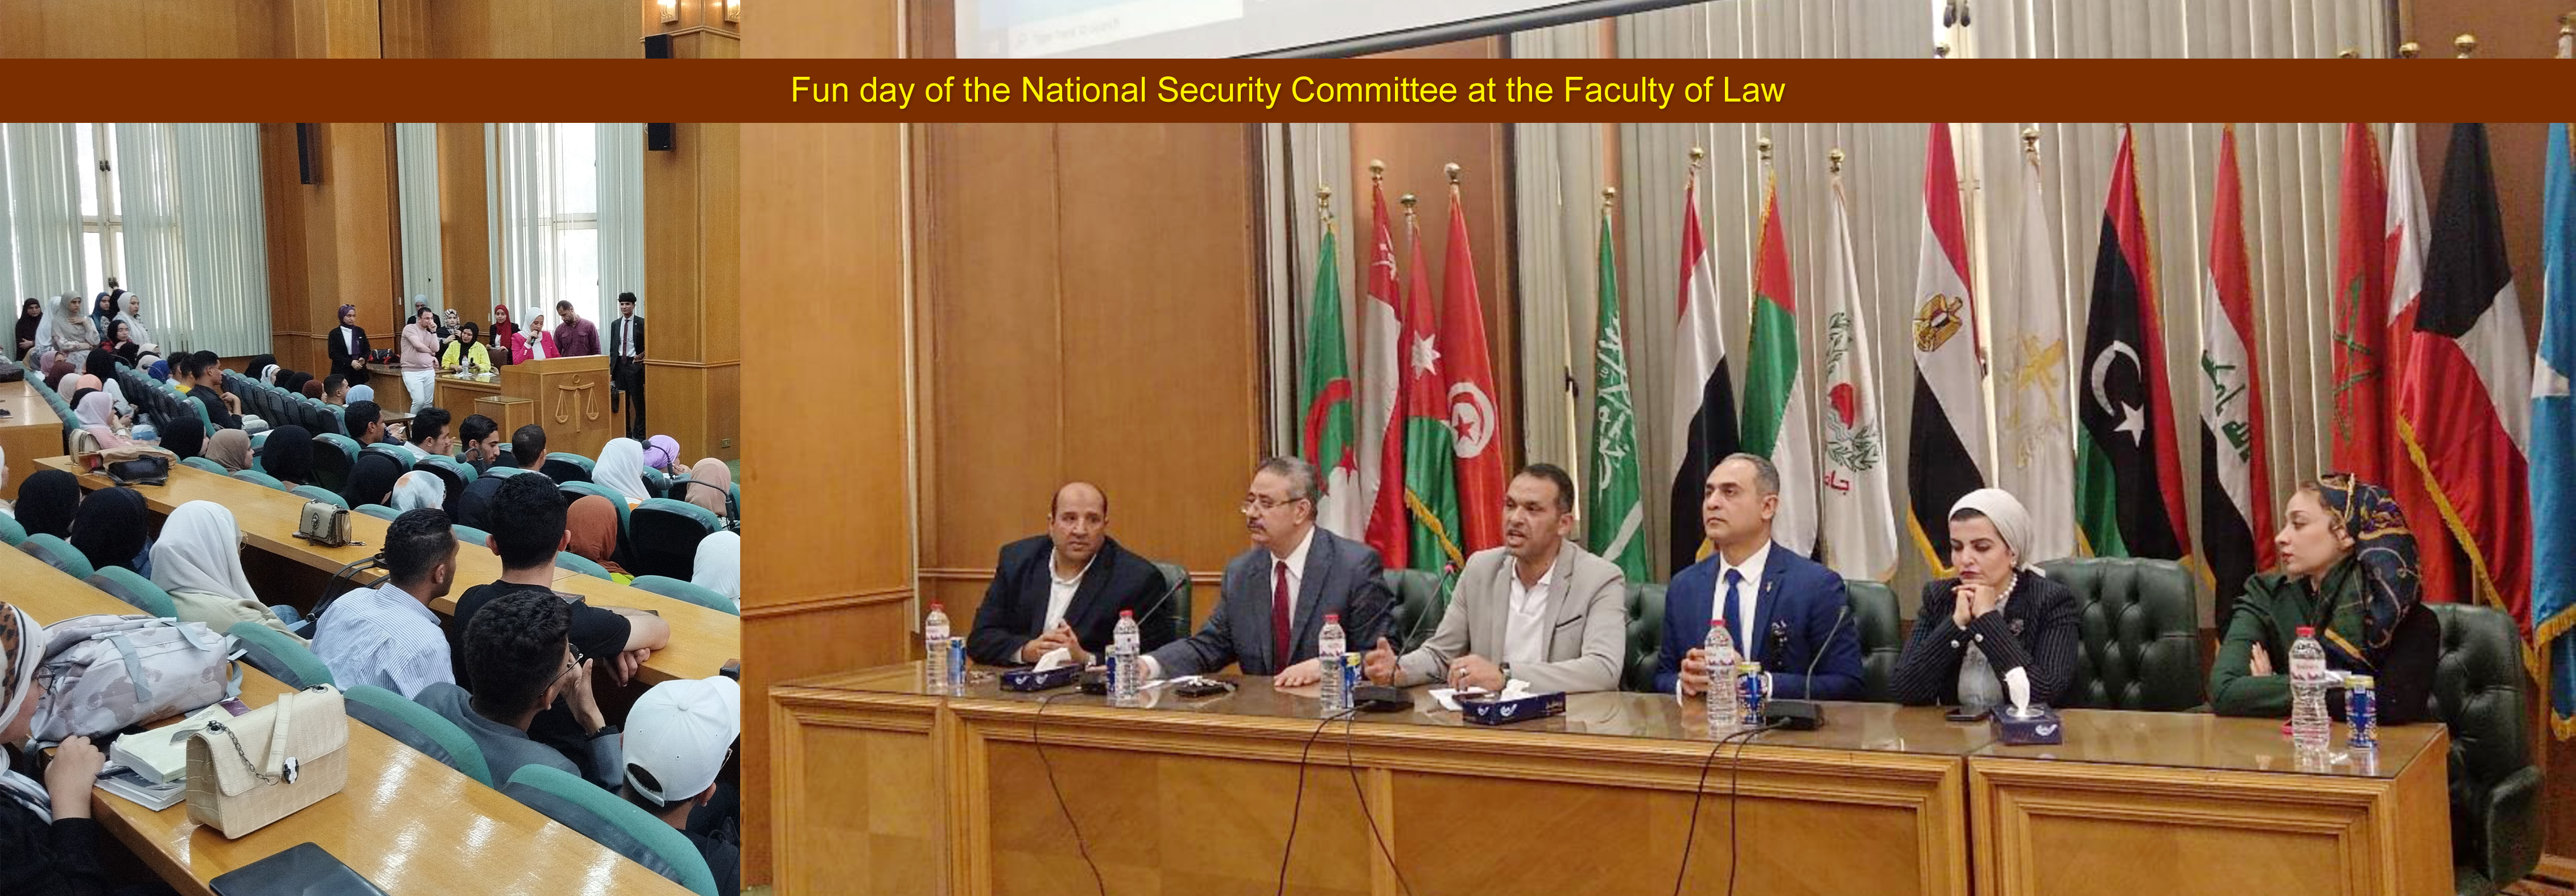 Fun day of the National Security Committee at the Faculty of Law, April 16, 2024